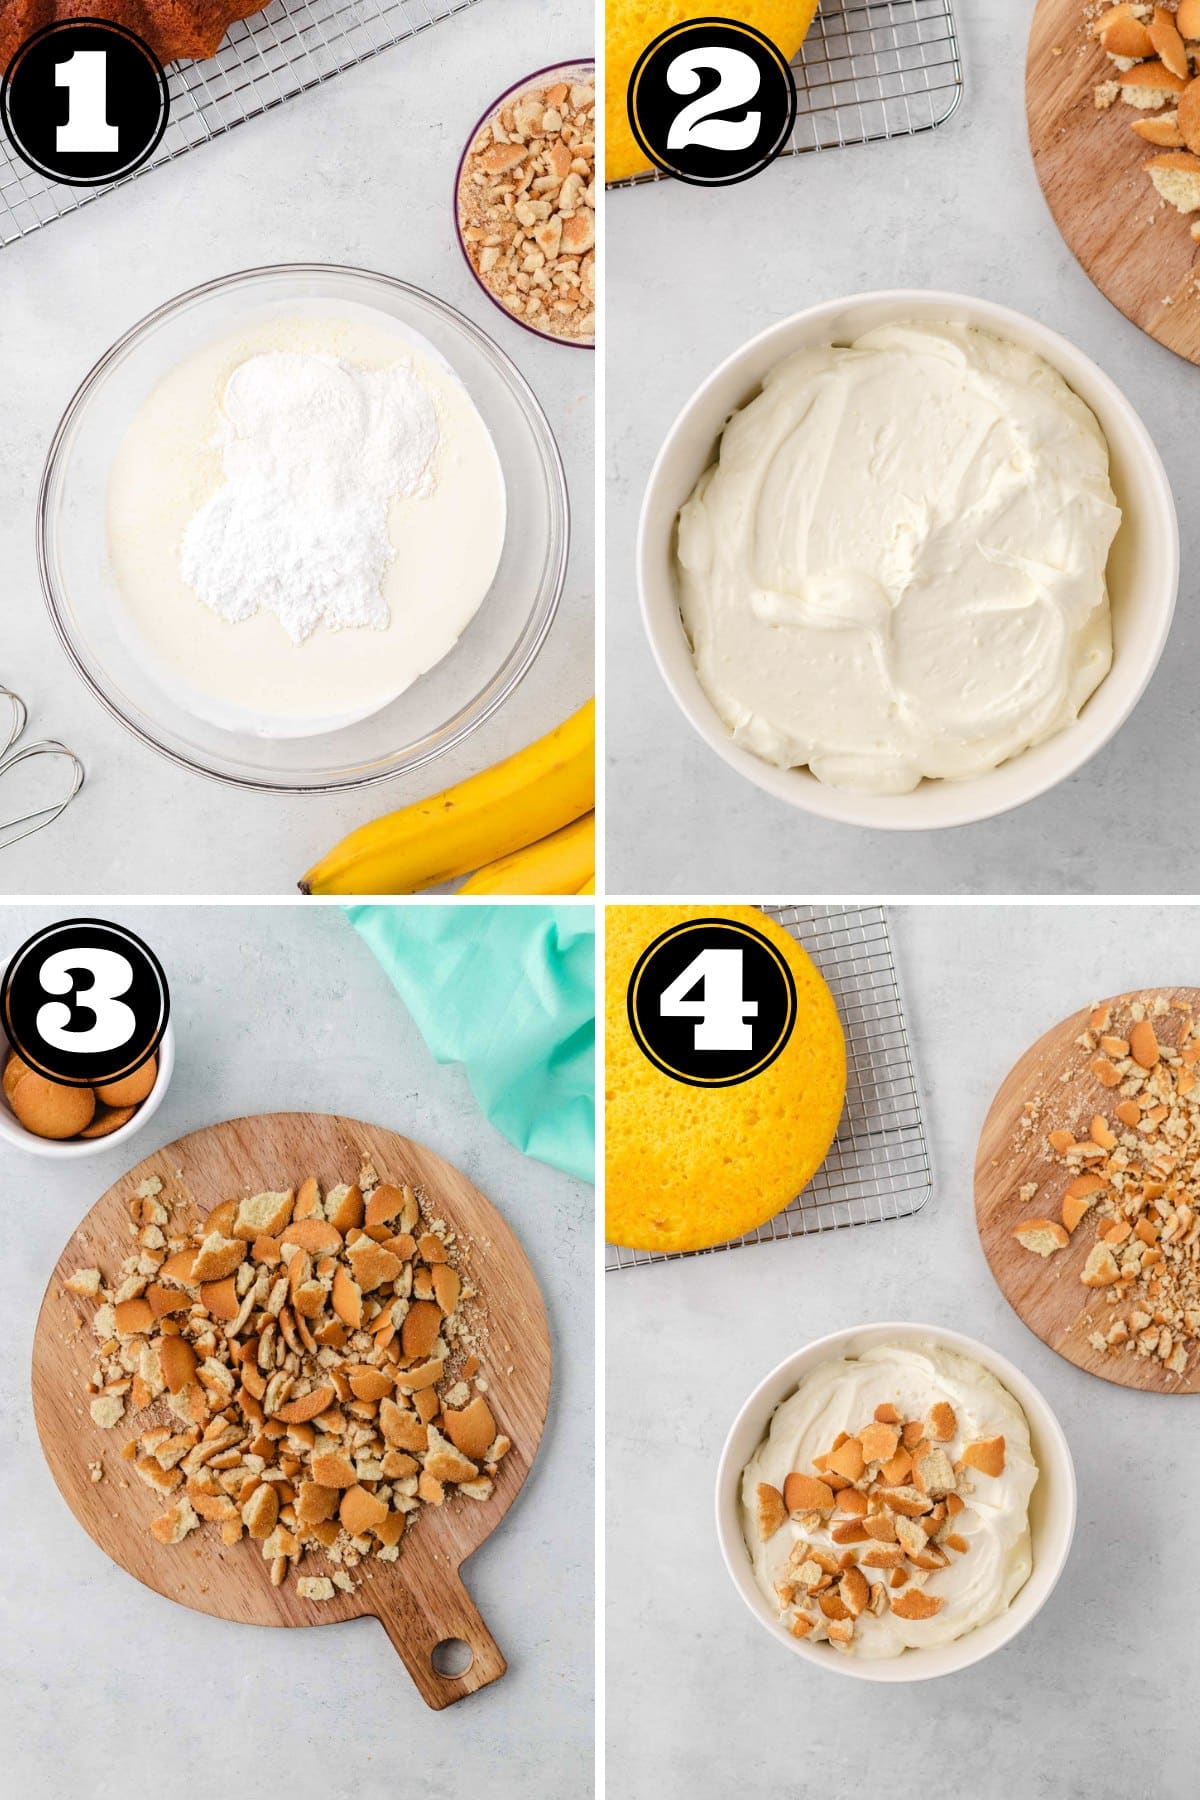 Collage image showing steps to make whipped cream icing, chopping vanilla wafers and adding to icing.